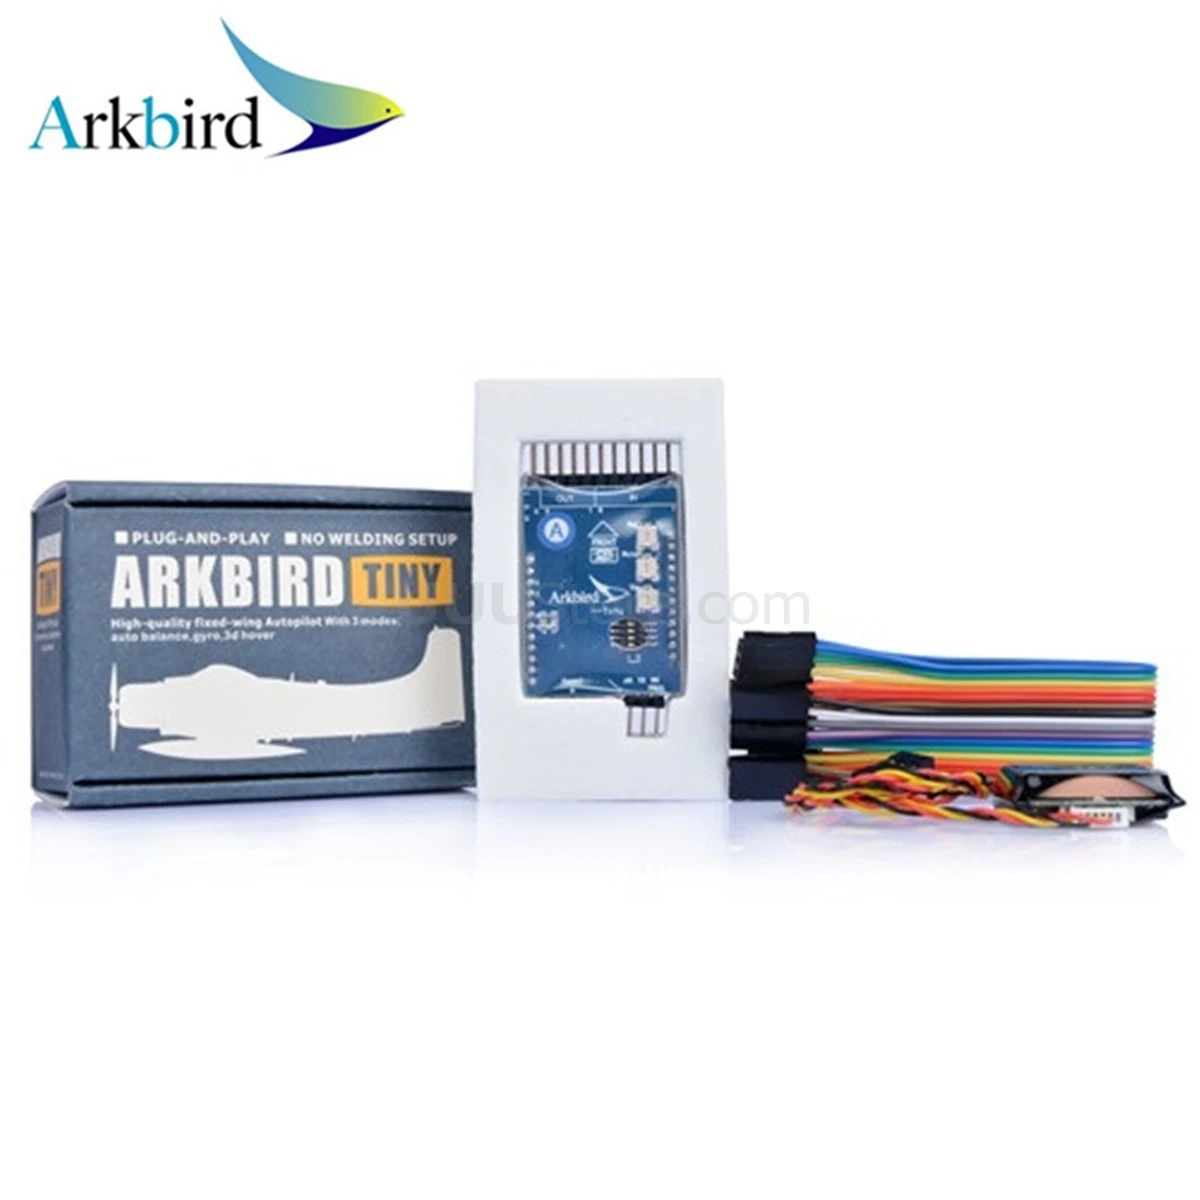 Arkbird Tiny FPV Autopilot and Flight Stablization System Including RTH and Fence designed for fixed-wing model aircraft 1